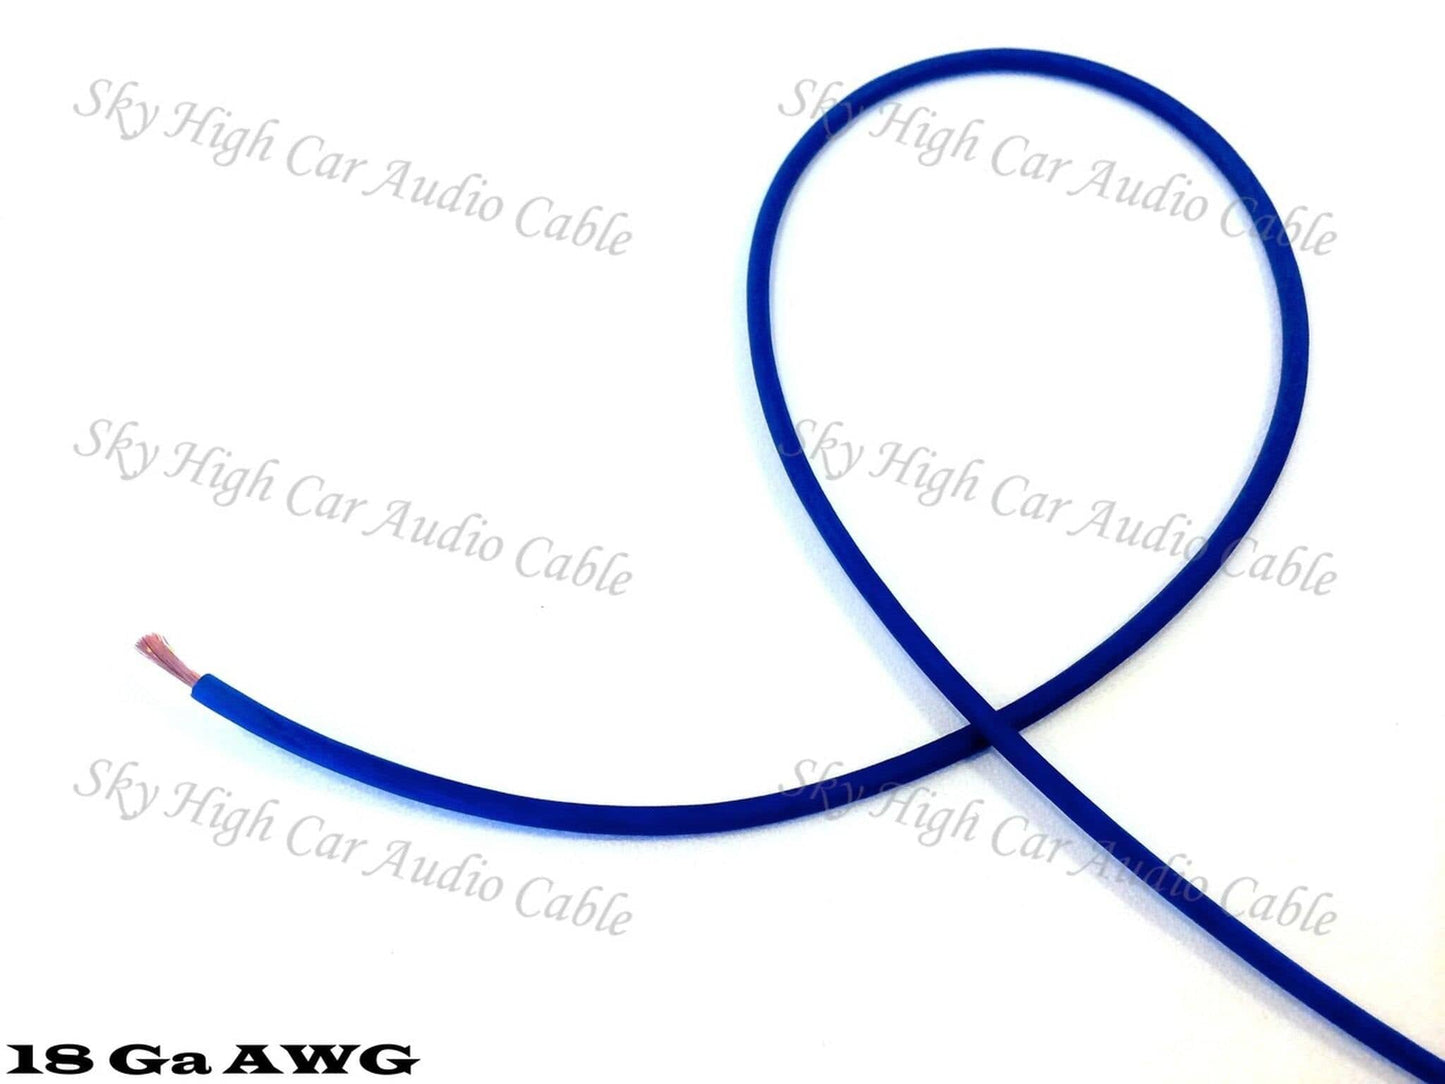 SkyHigh Amp Installation Products SKY HIGH CAR AUDIO 2nd Amp Wiring Kit for Fairing or Pak